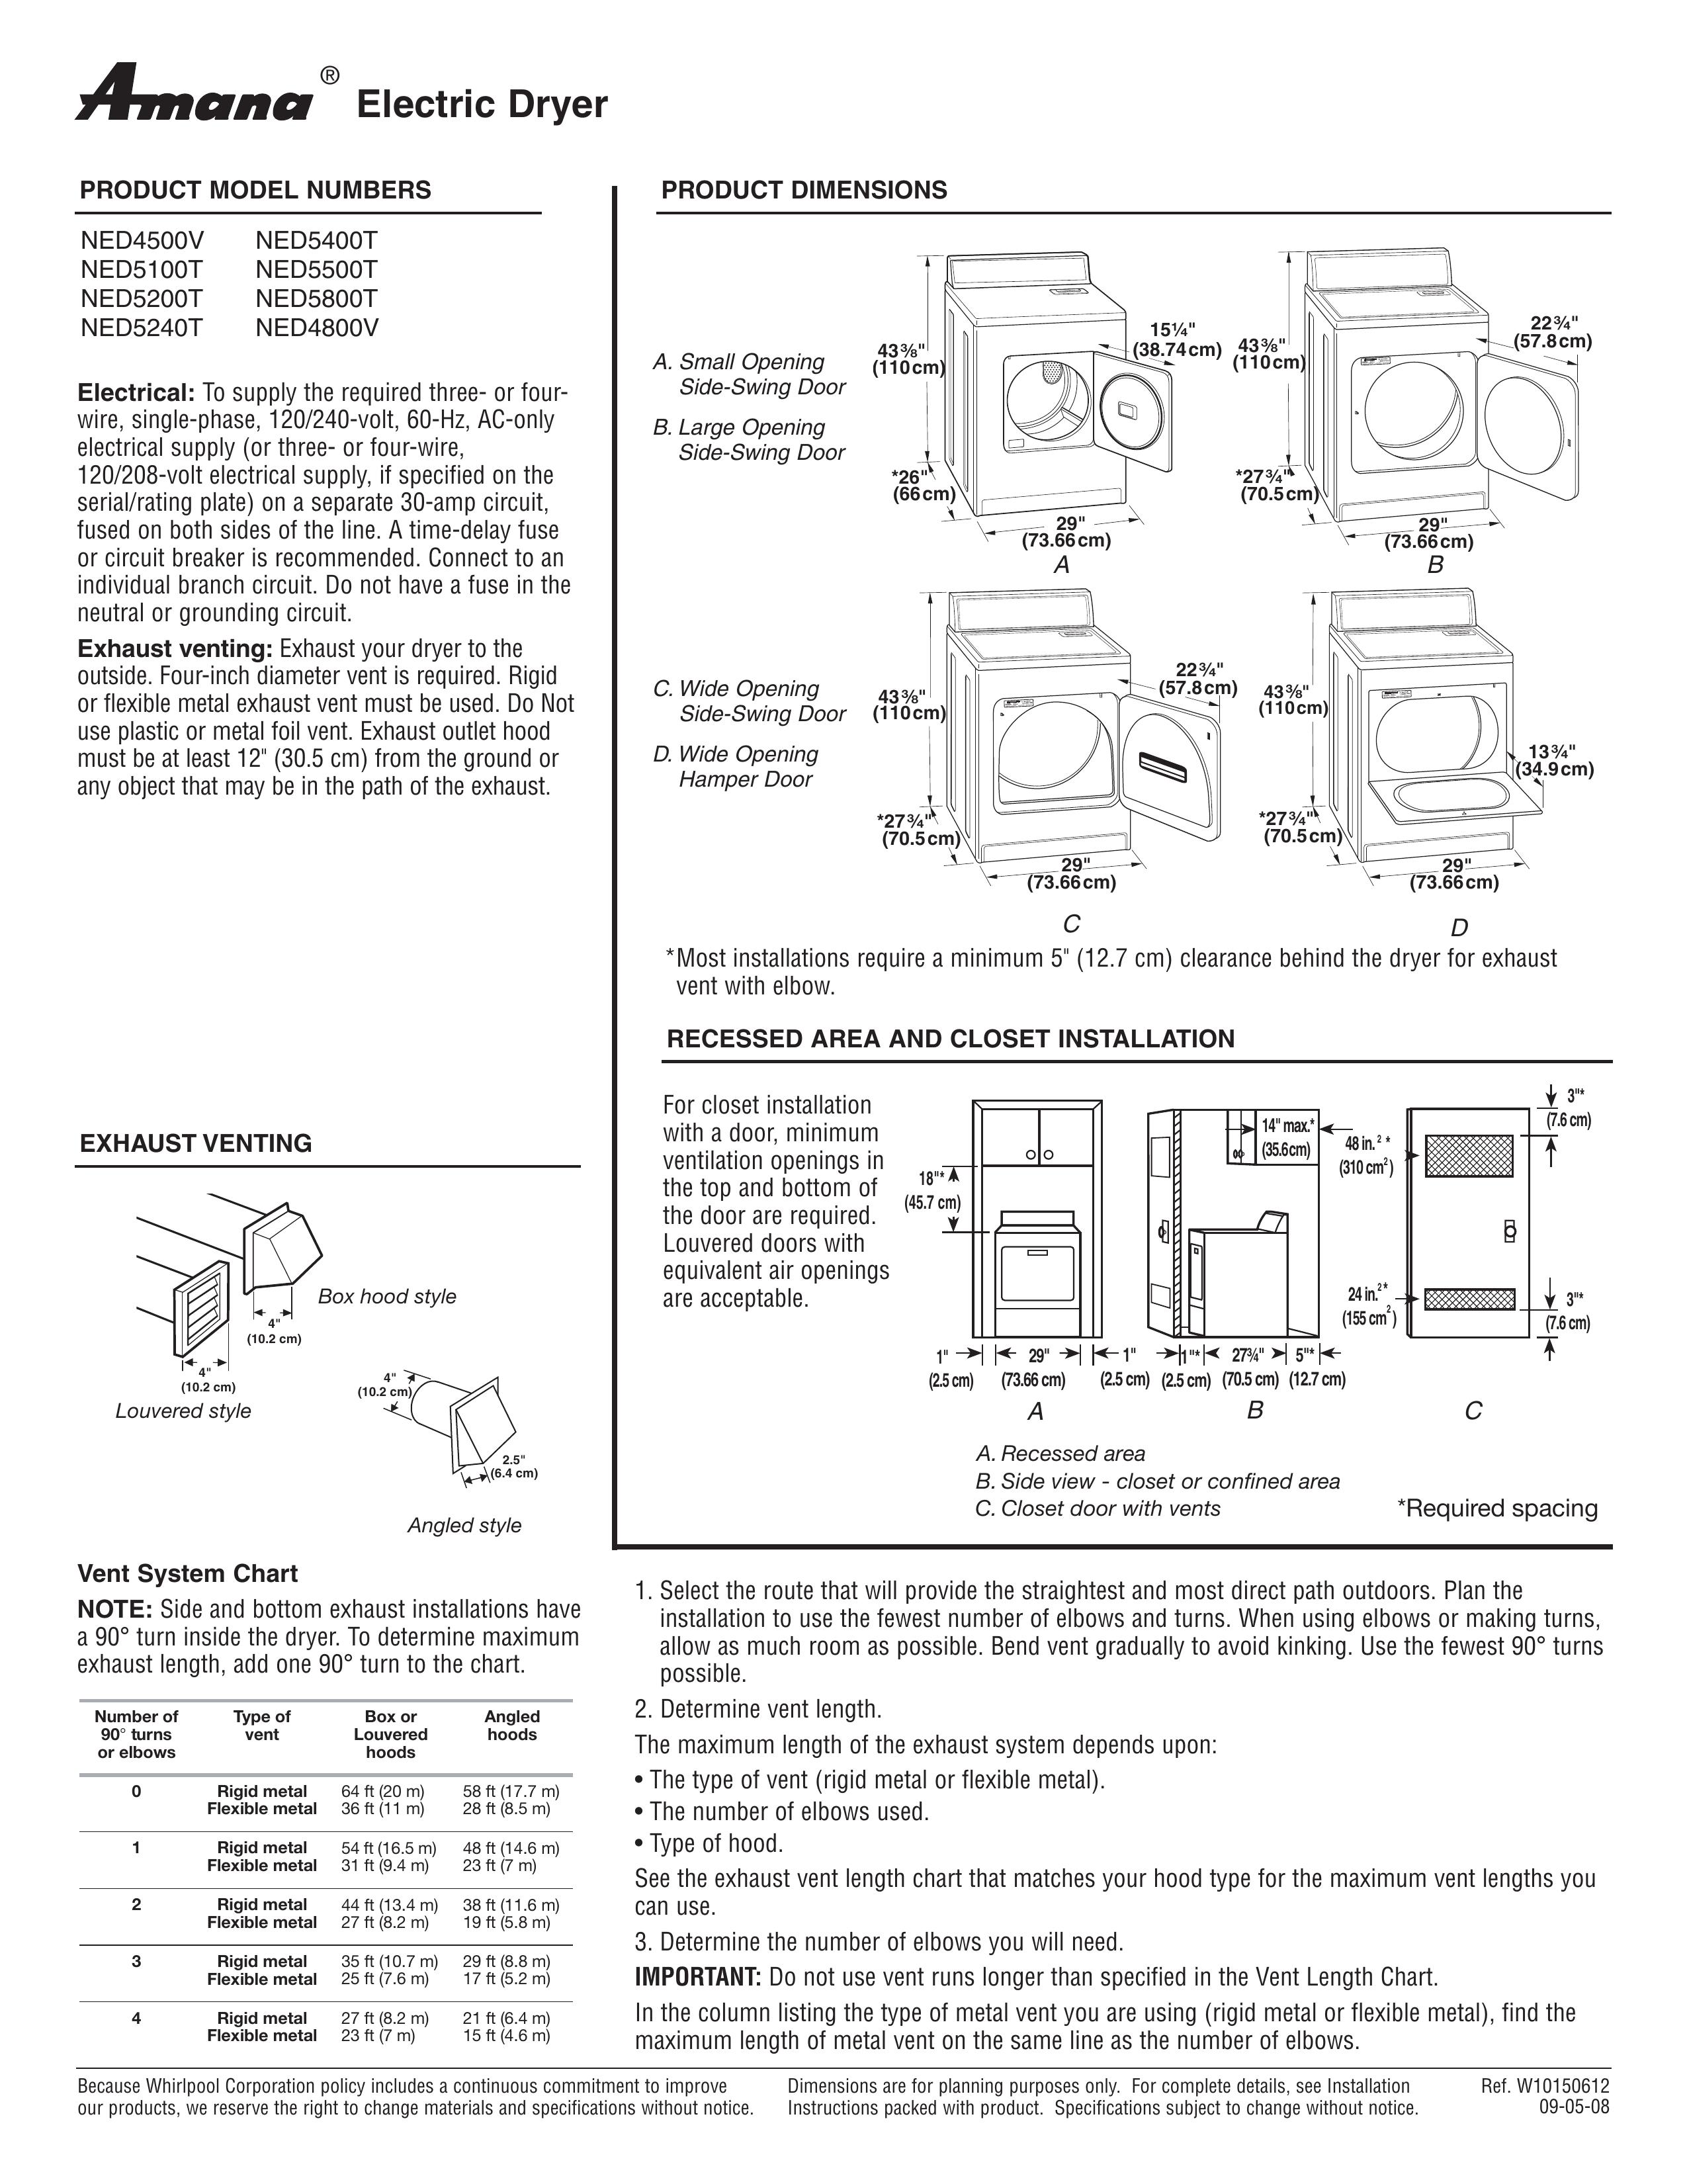 Amana NED5100T Clothes Dryer User Manual